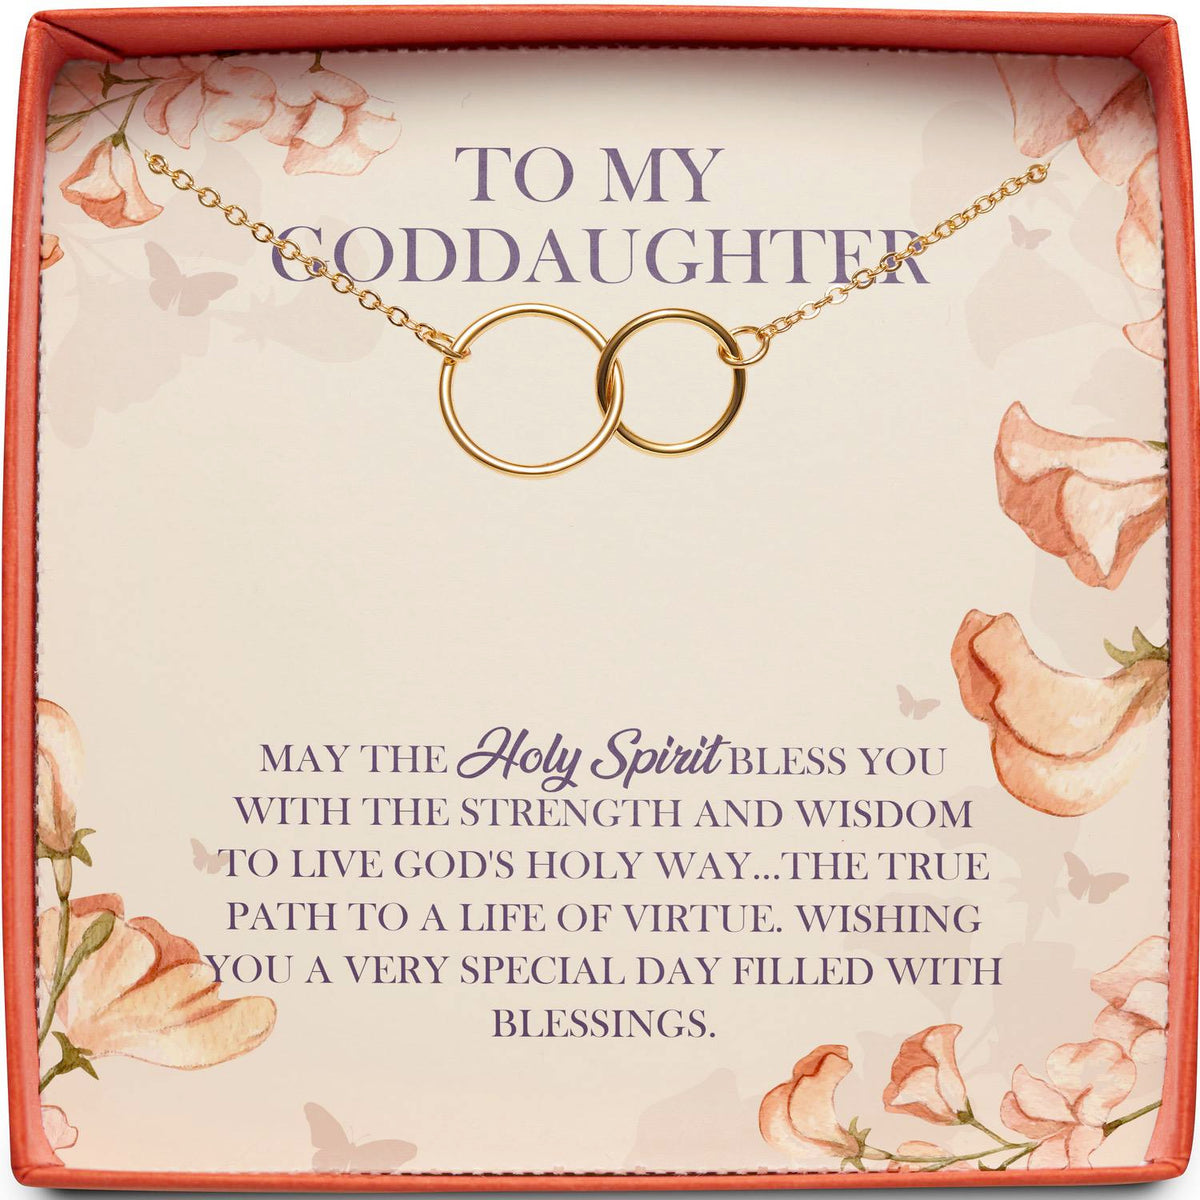 To My Goddaughter | May the Holy Spirit Bless You | Interlocking Circles